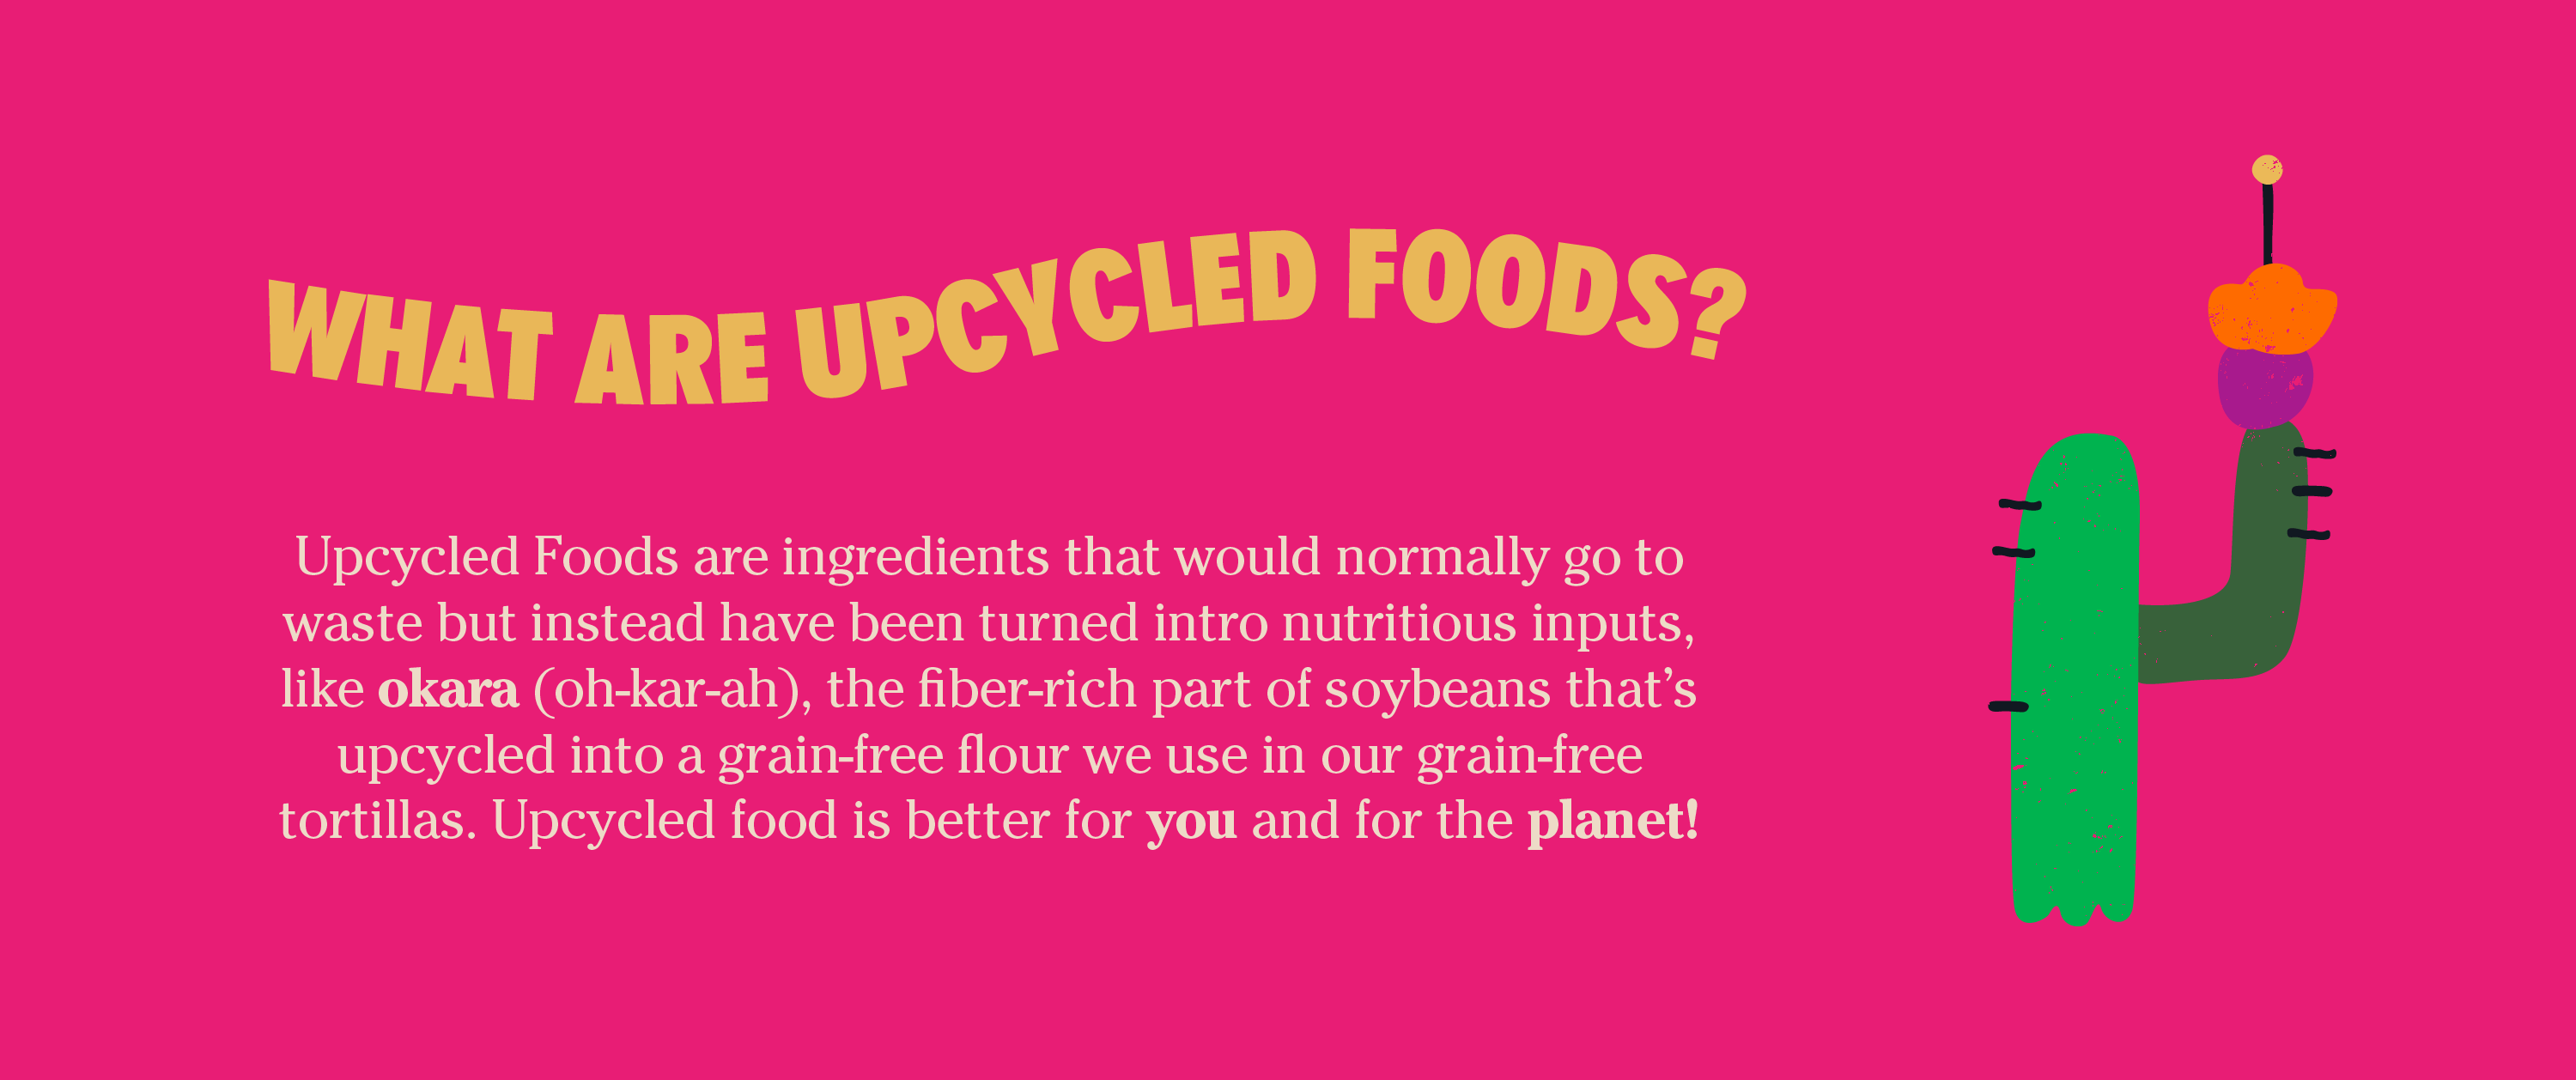 What are upcycled foods?